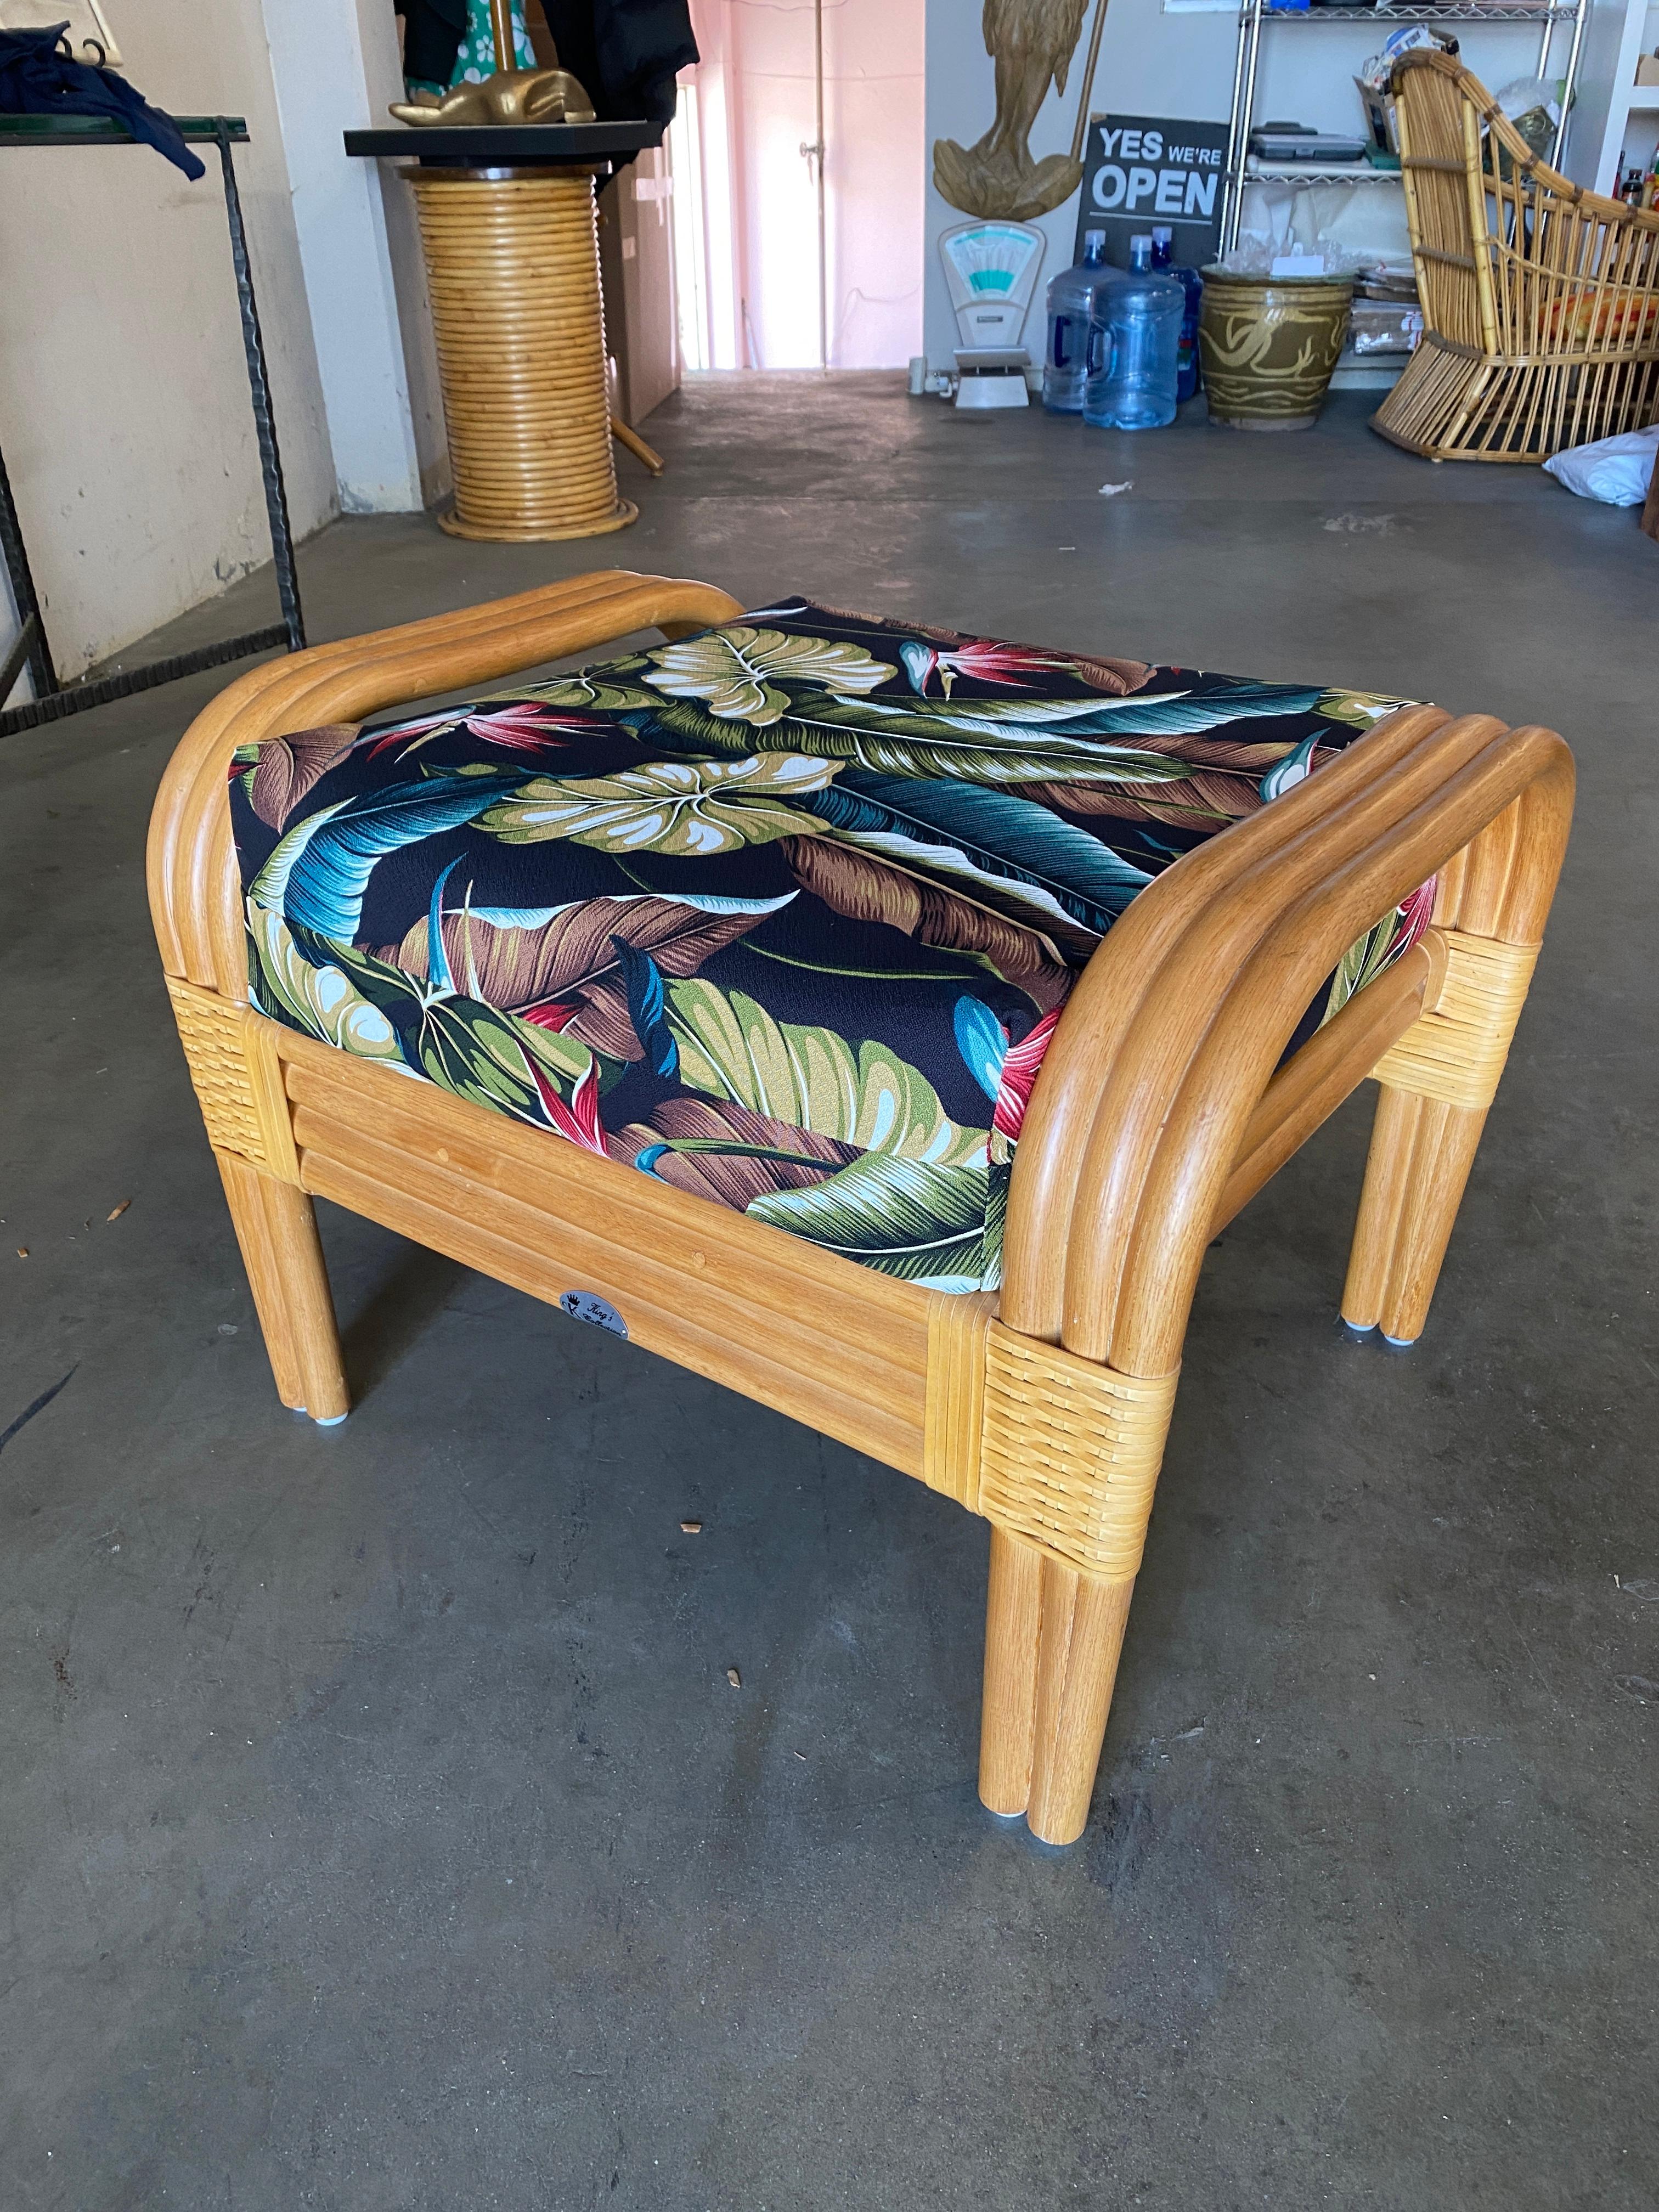 Modern Three-Stand Rattan Staple Side Ottoman Stool with Barkcloth Cushion In Excellent Condition For Sale In Van Nuys, CA